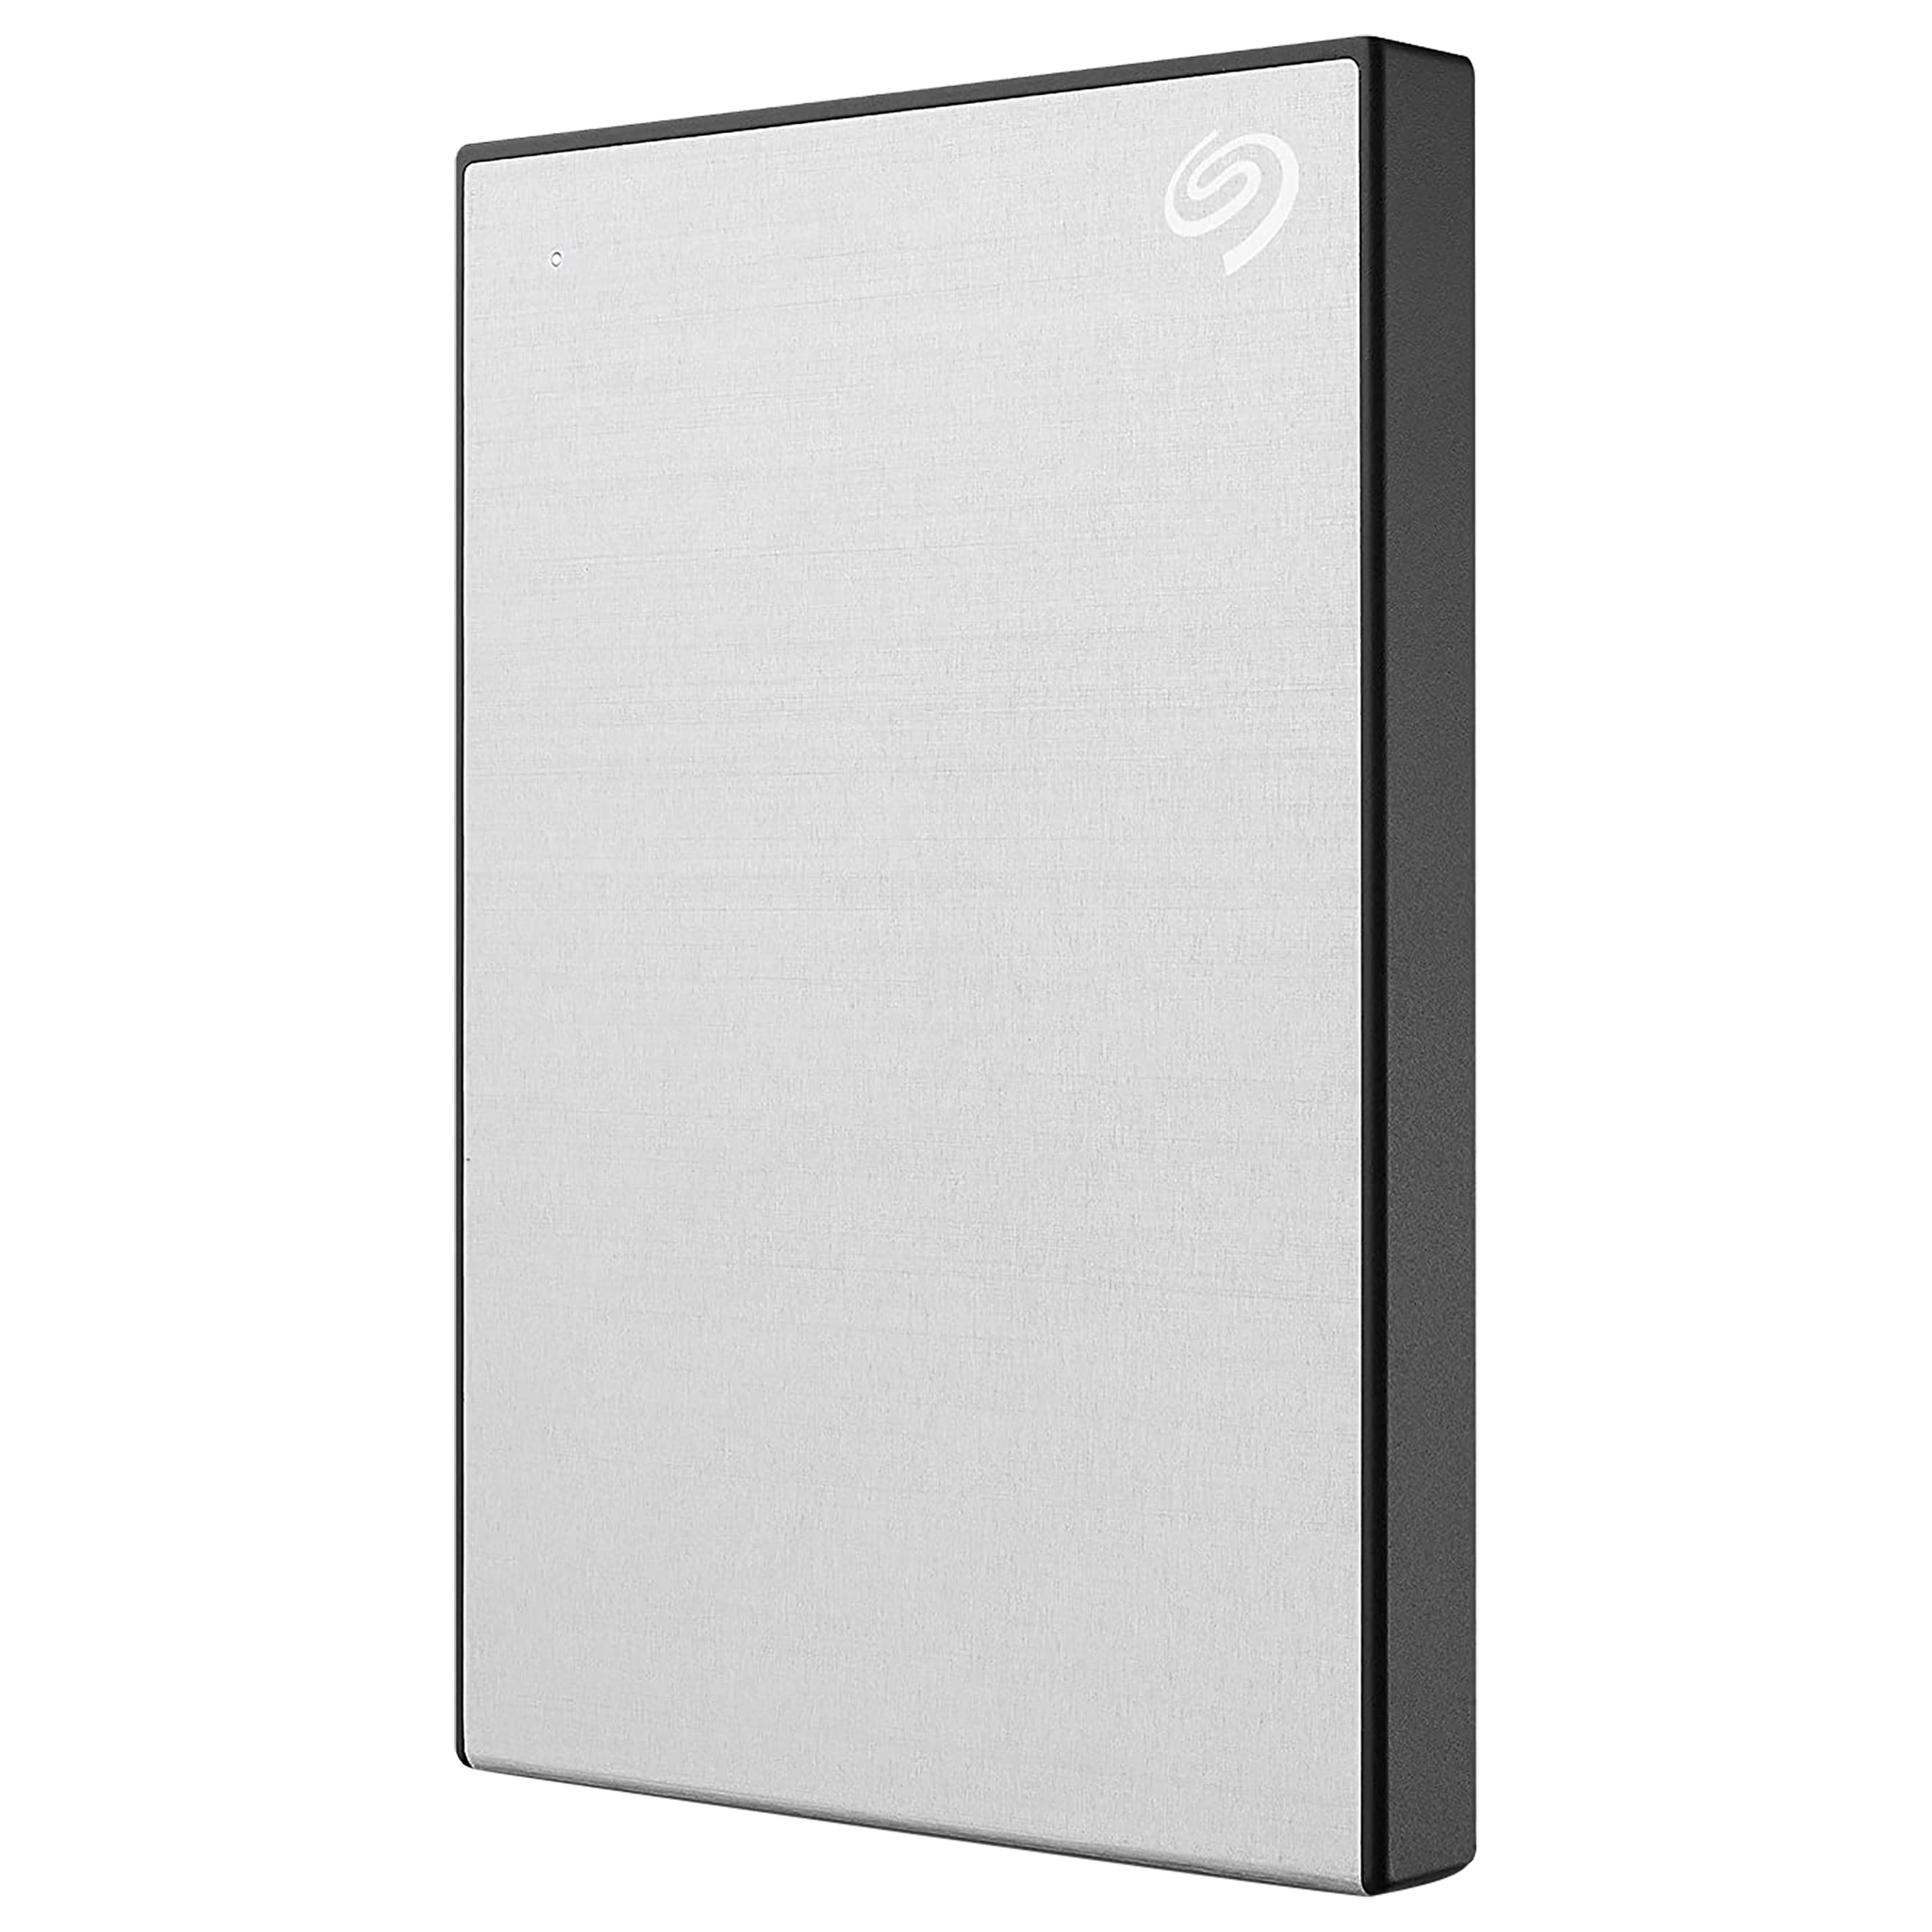 Seagate - Seagate One Touch 1TB USB 3.0 Hard Disk Drive (Advanced Password Protection, STKY1000401, Silver)